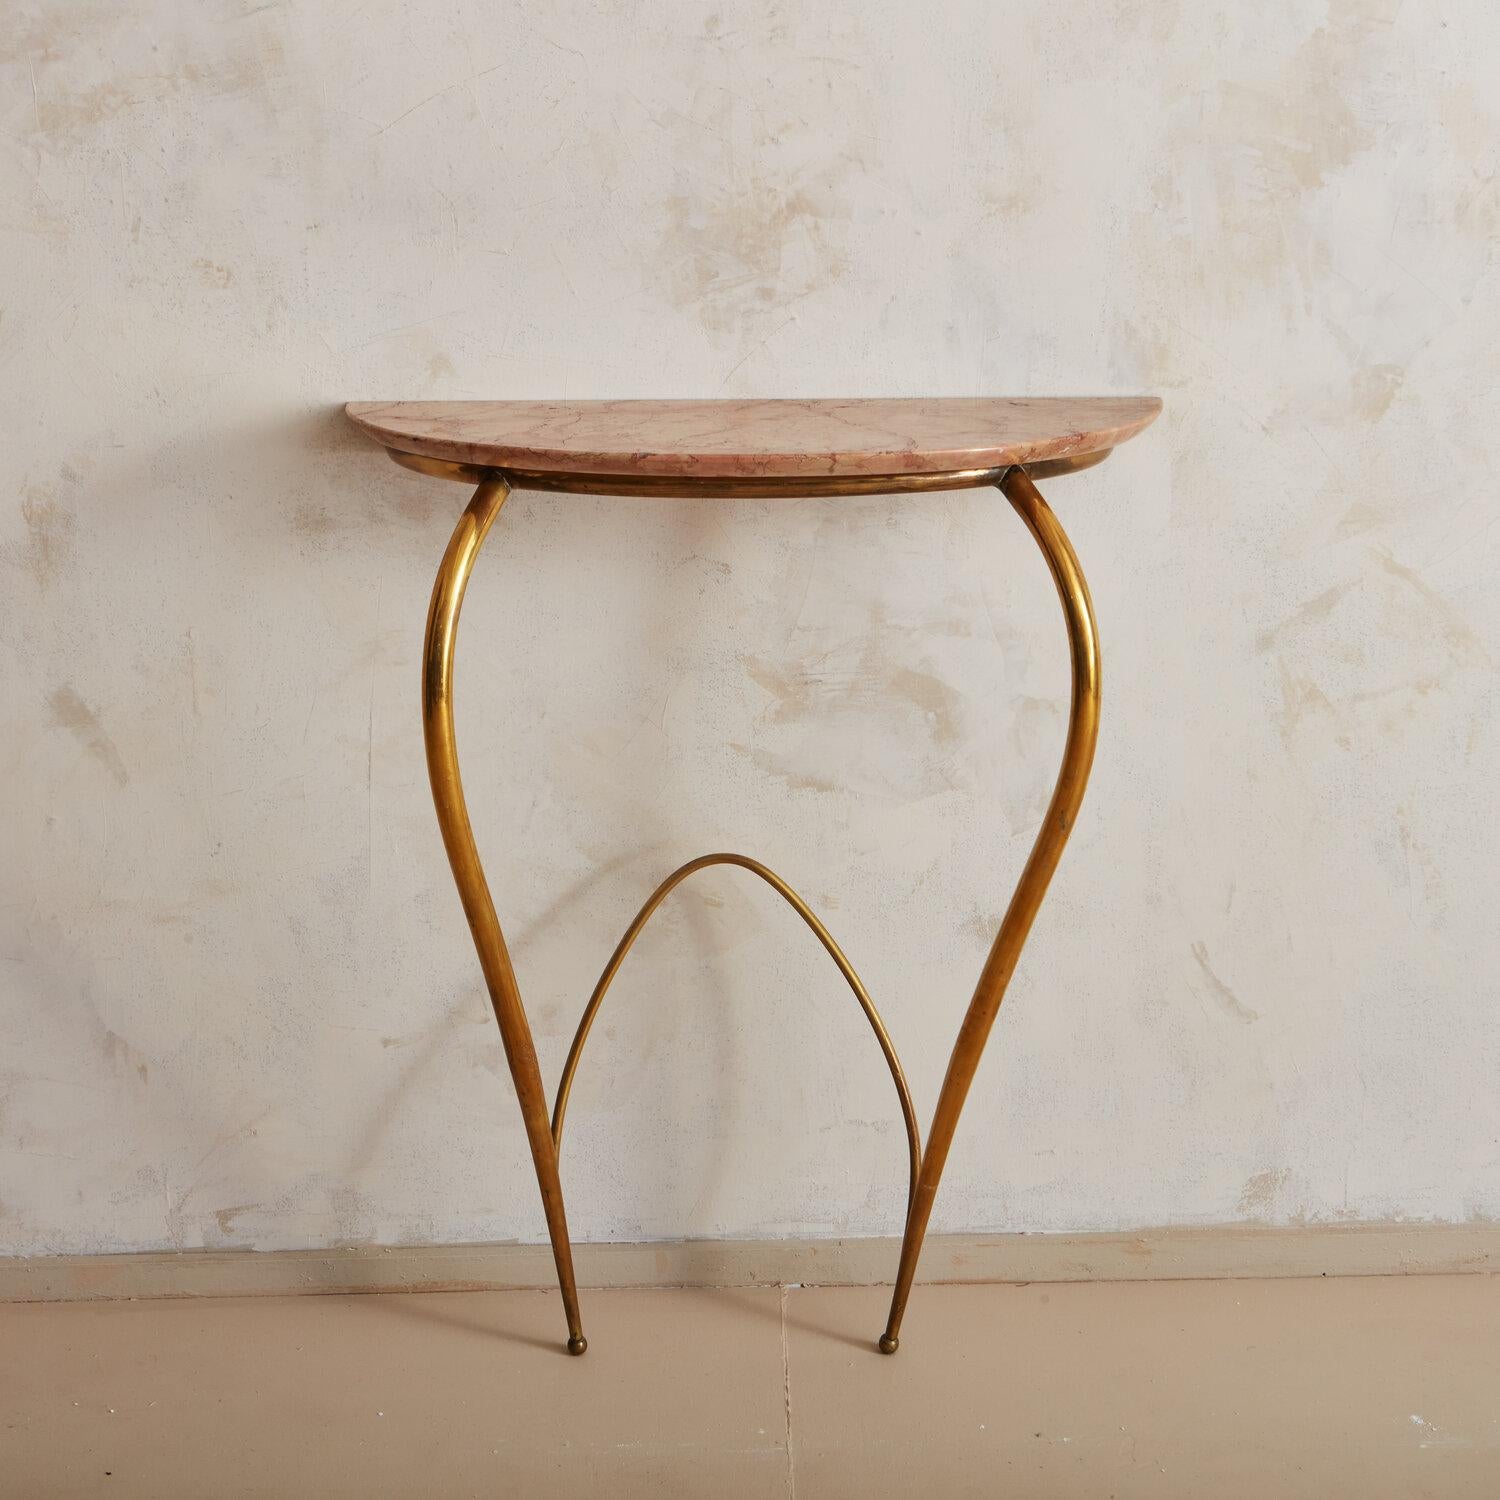 A petite console table for a hallway or entryway; this features a curved brass frame and a pink marble demilune shaped top. This table is meant to mount directly to the wall; it is not freestanding.